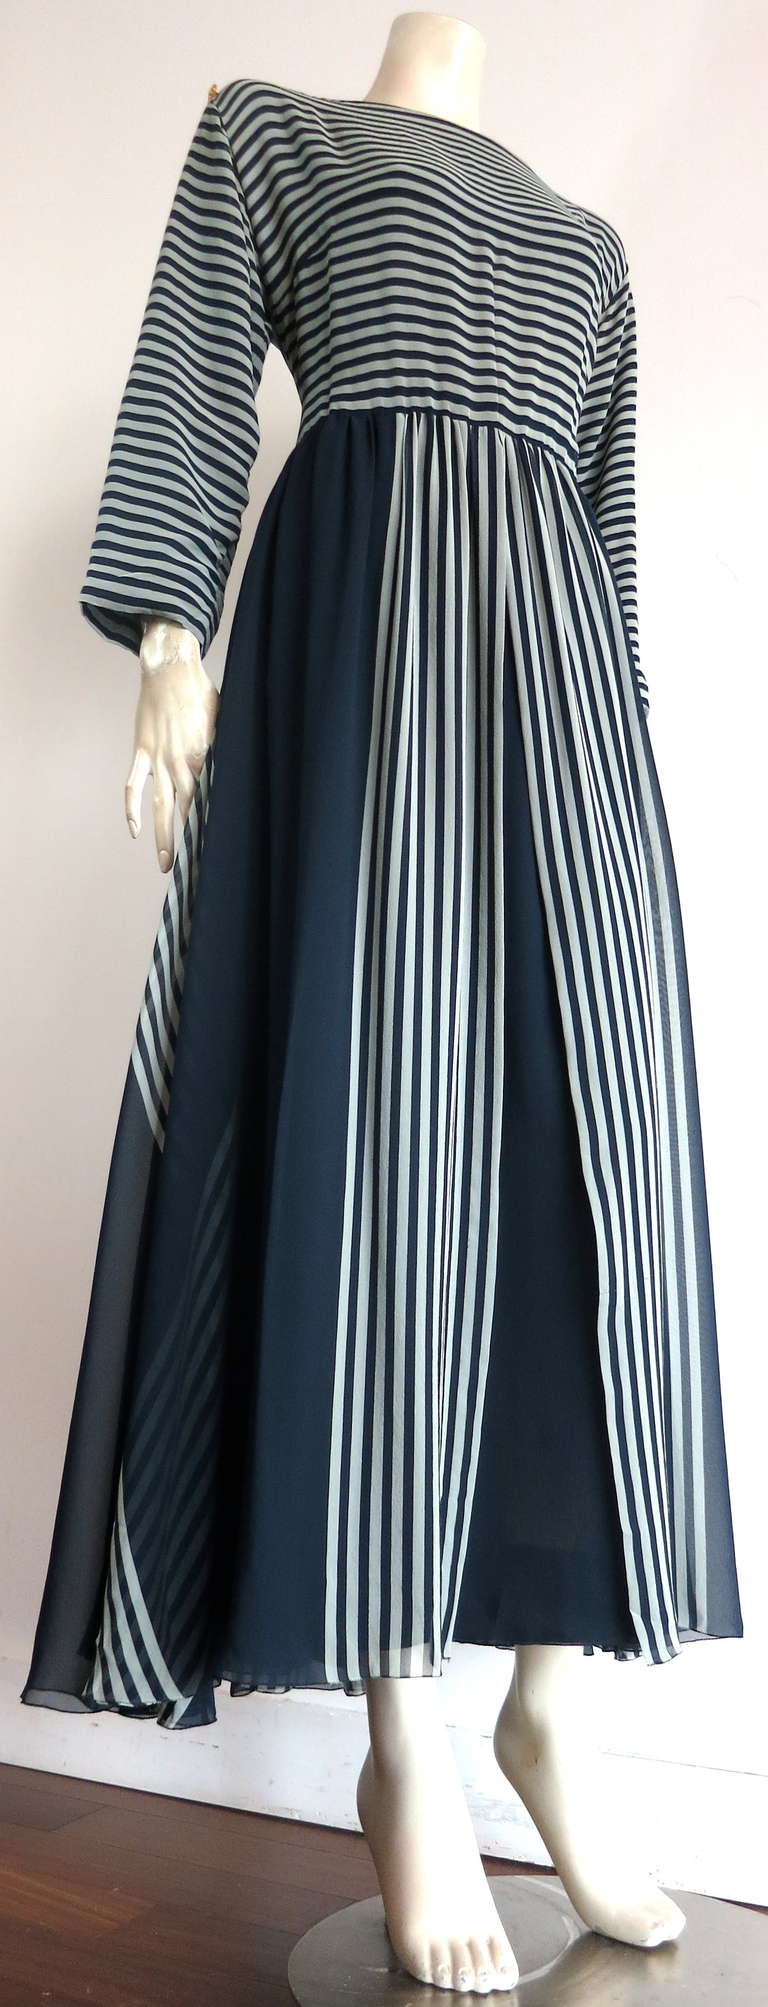 Vintage CHANEL Navy silk stripe dress.

Gorgeous CHANEL 1980's era silk chiffon dress featuring navy and whisper gray printed stripes.  

The top bodice of the dress features a boat neckline with 'CC' monogram logo engraved, gold finish metal